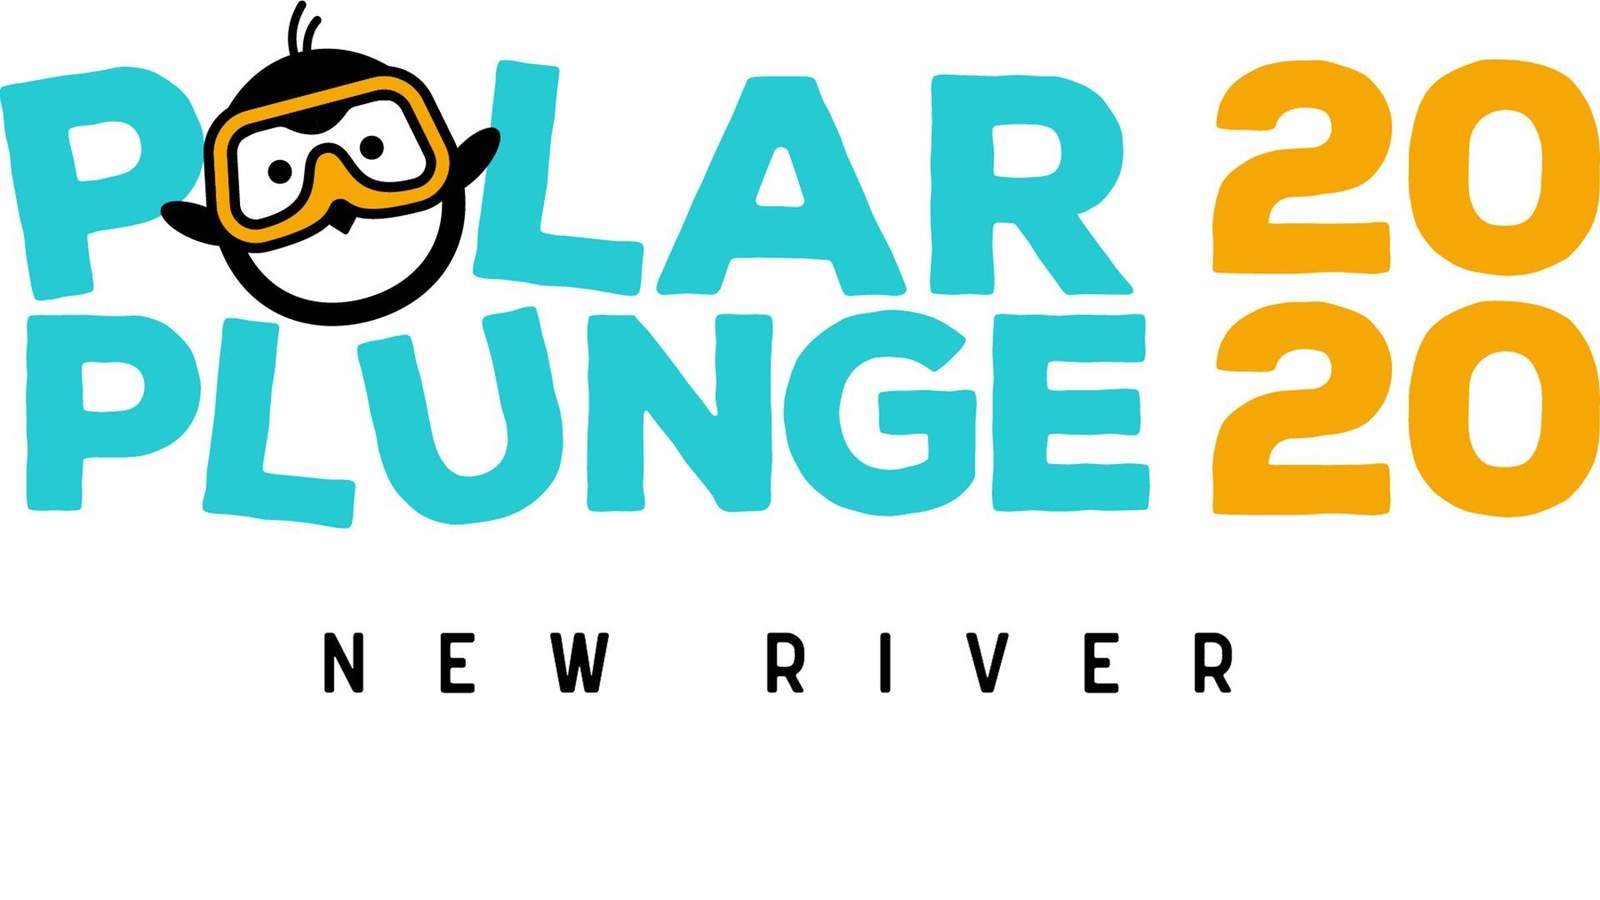 10 News is gearing up for the Polar Plunge: Here’s how you can help!